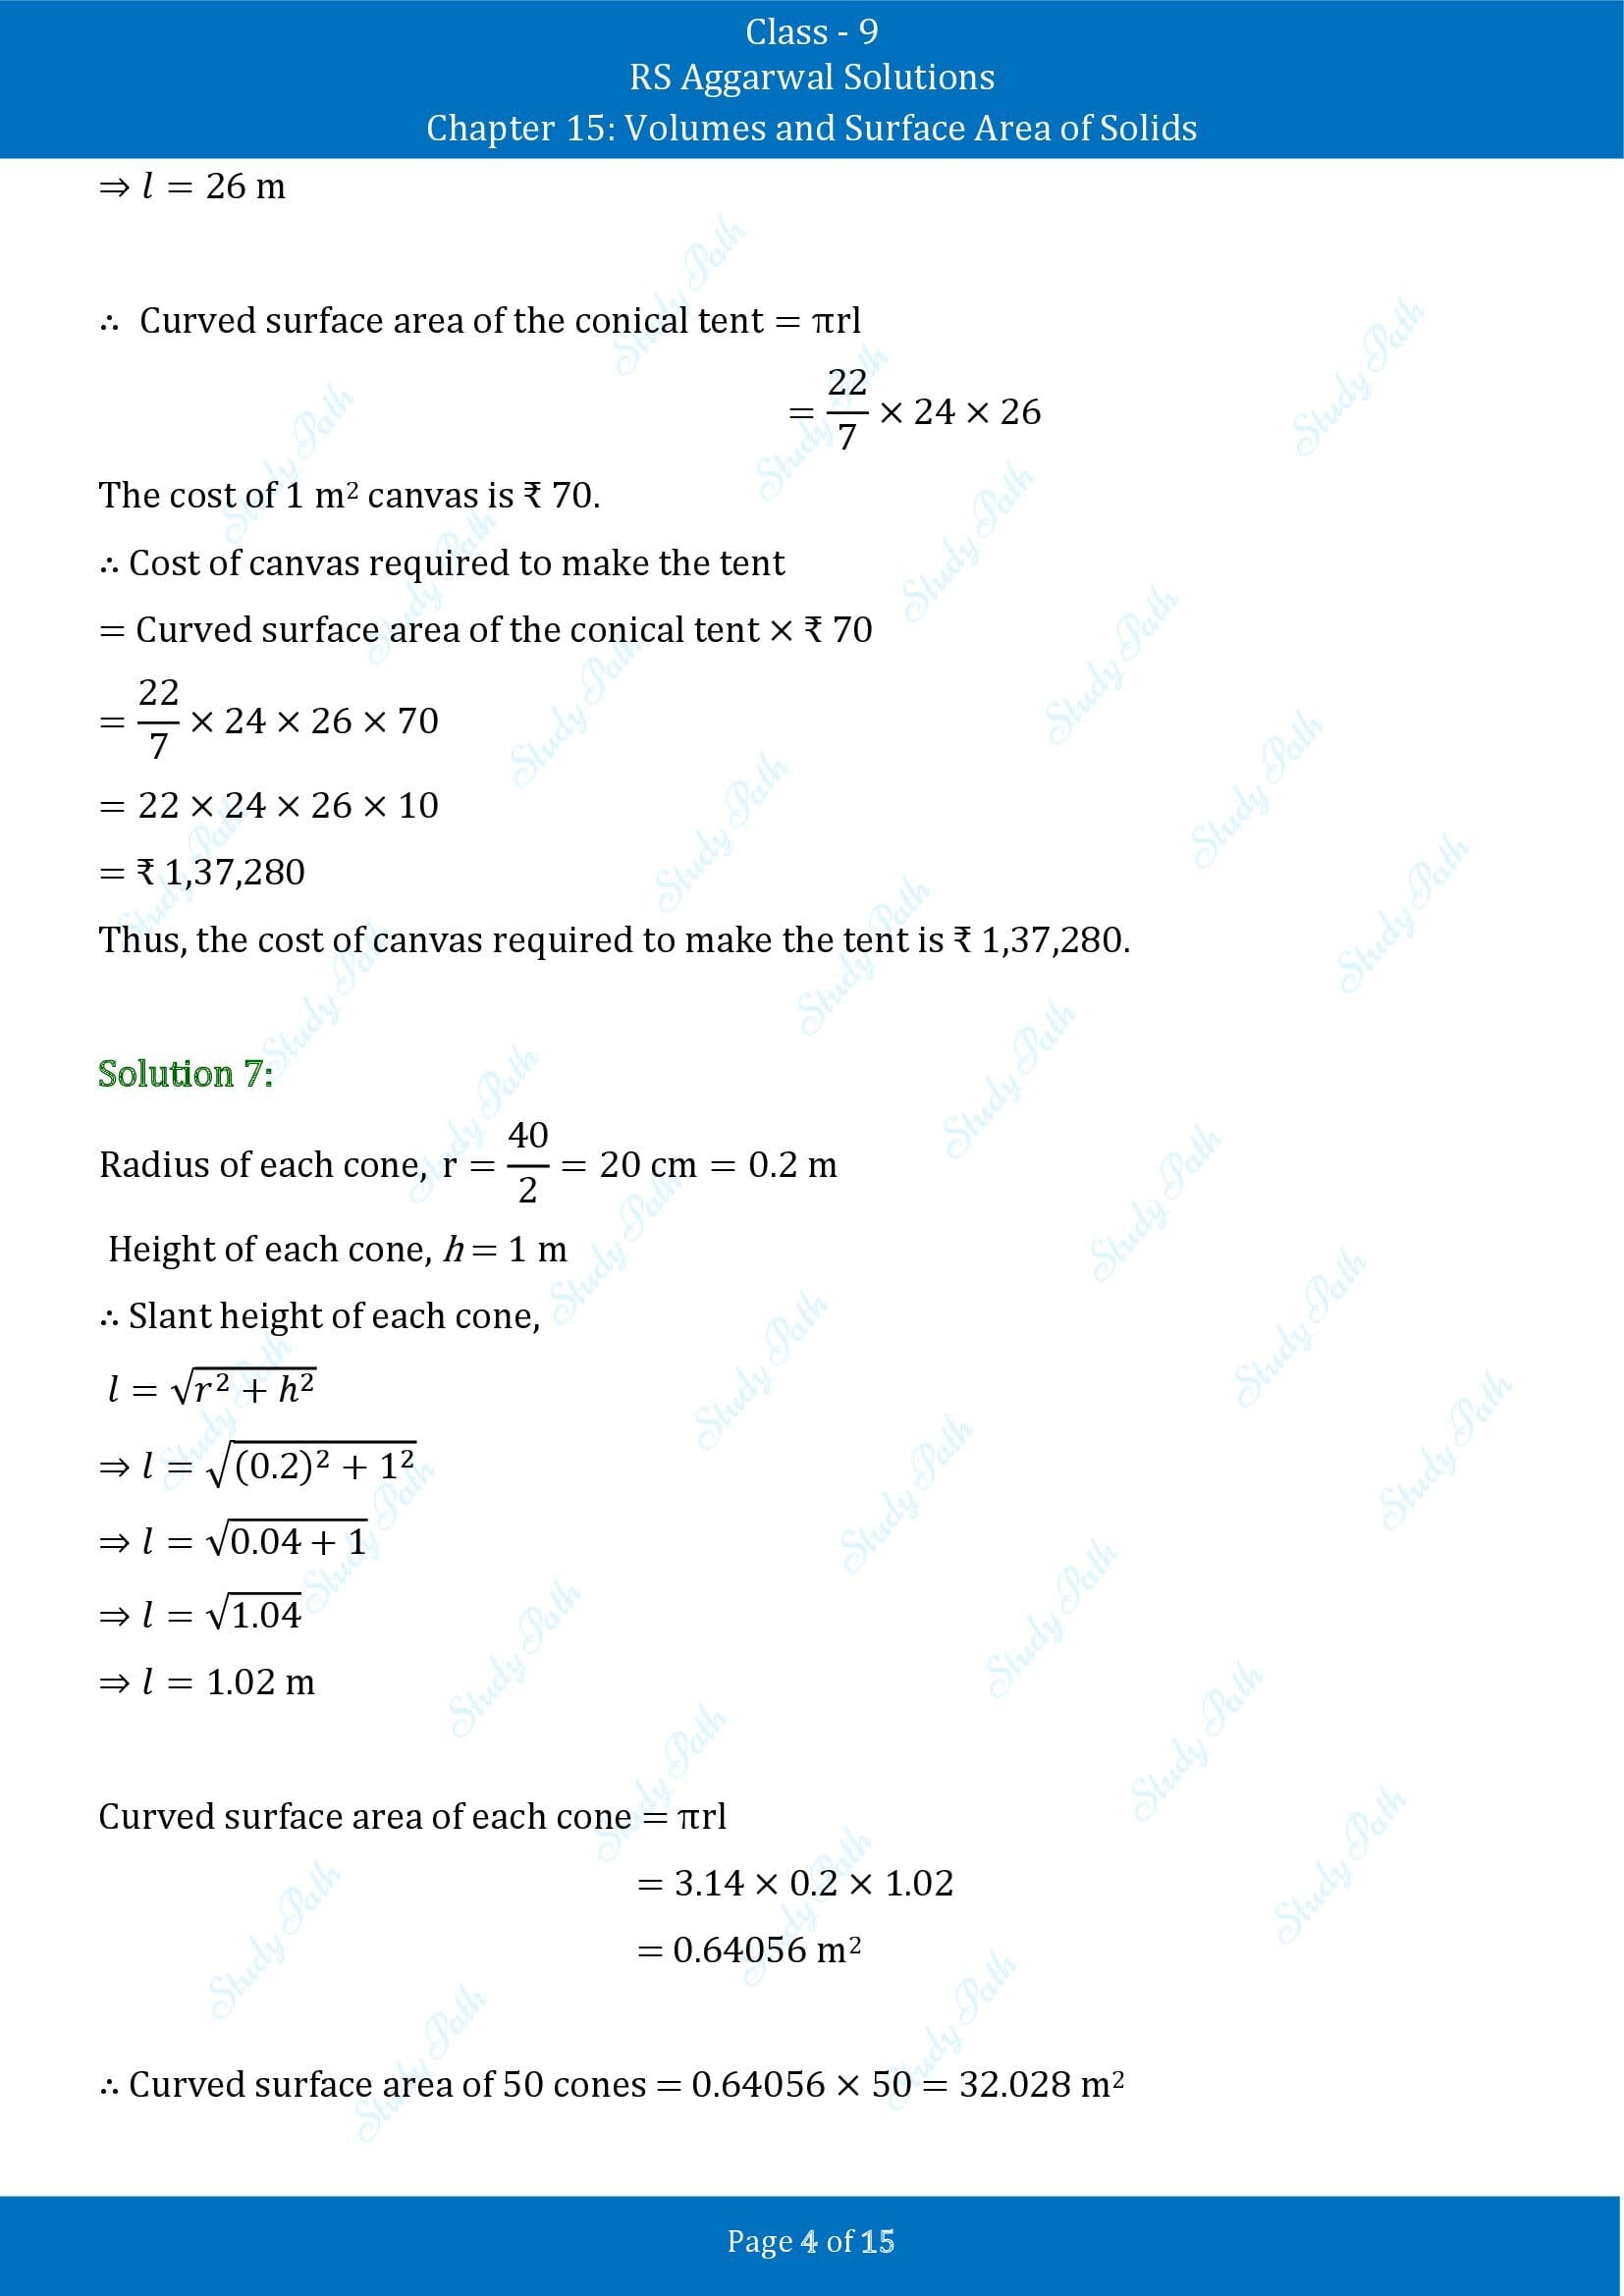 RS Aggarwal Solutions Class 9 Chapter 15 Volumes and Surface Area of Solids Exercise 15C 00004